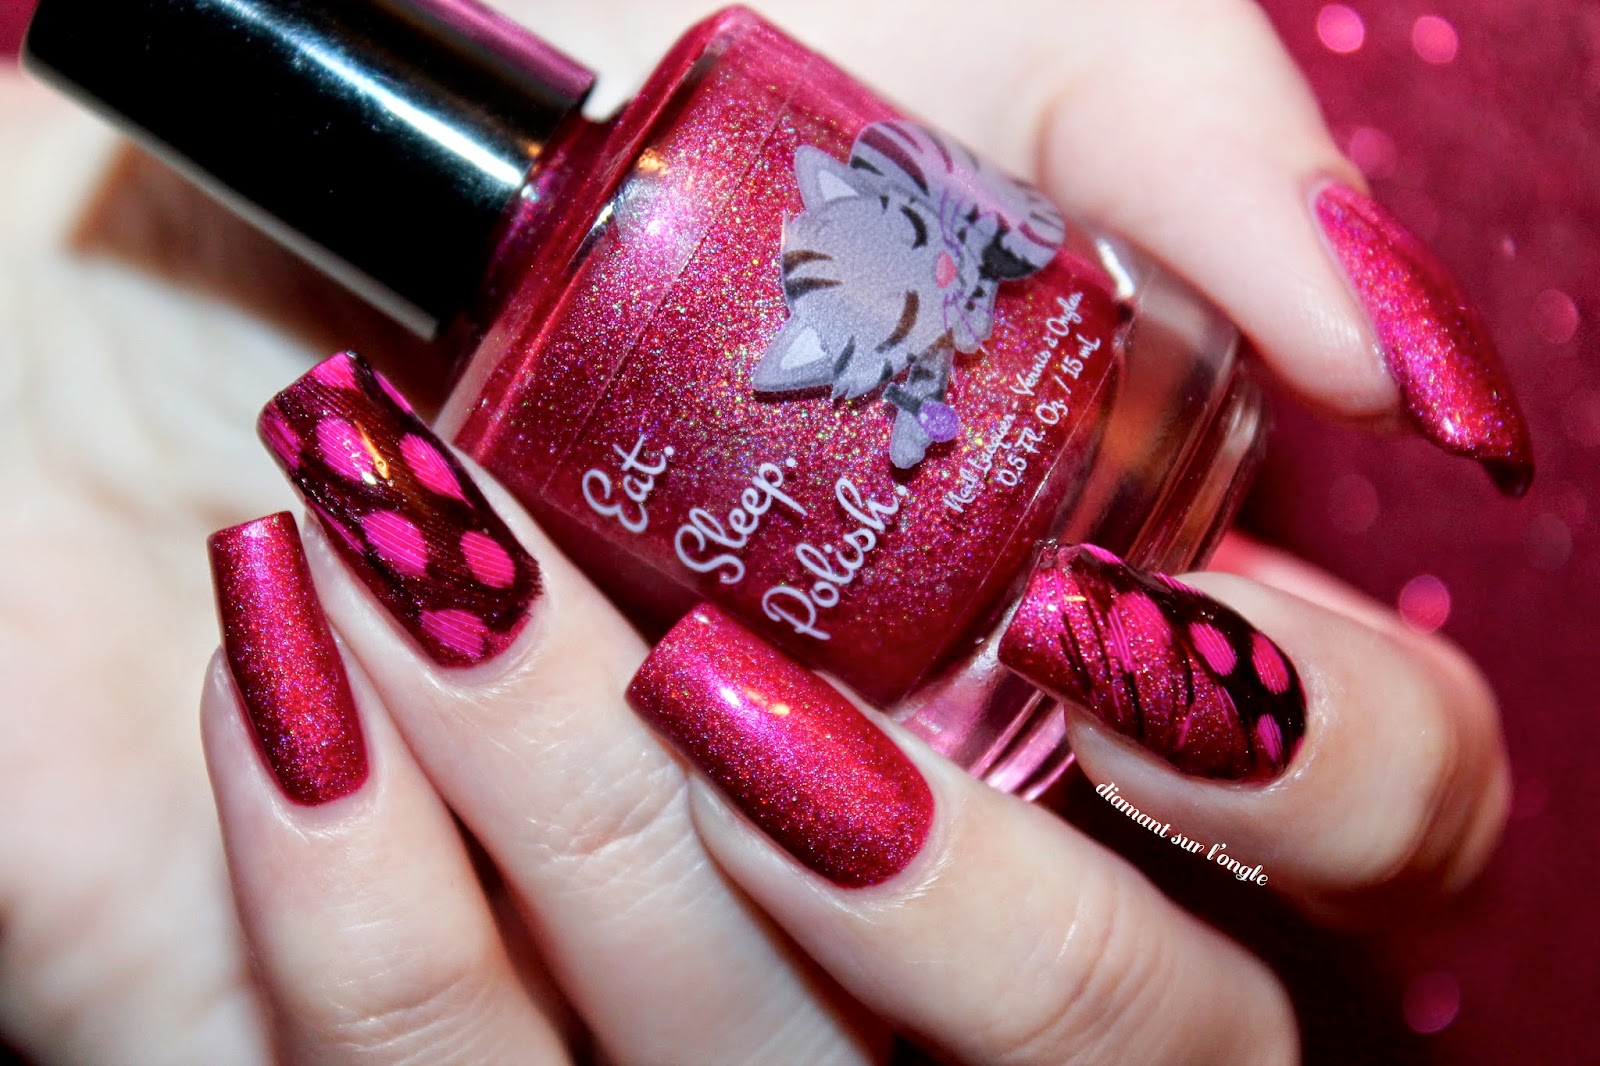 Feather nail art with "Glitterberry" by Eat.Sleep.Polish.